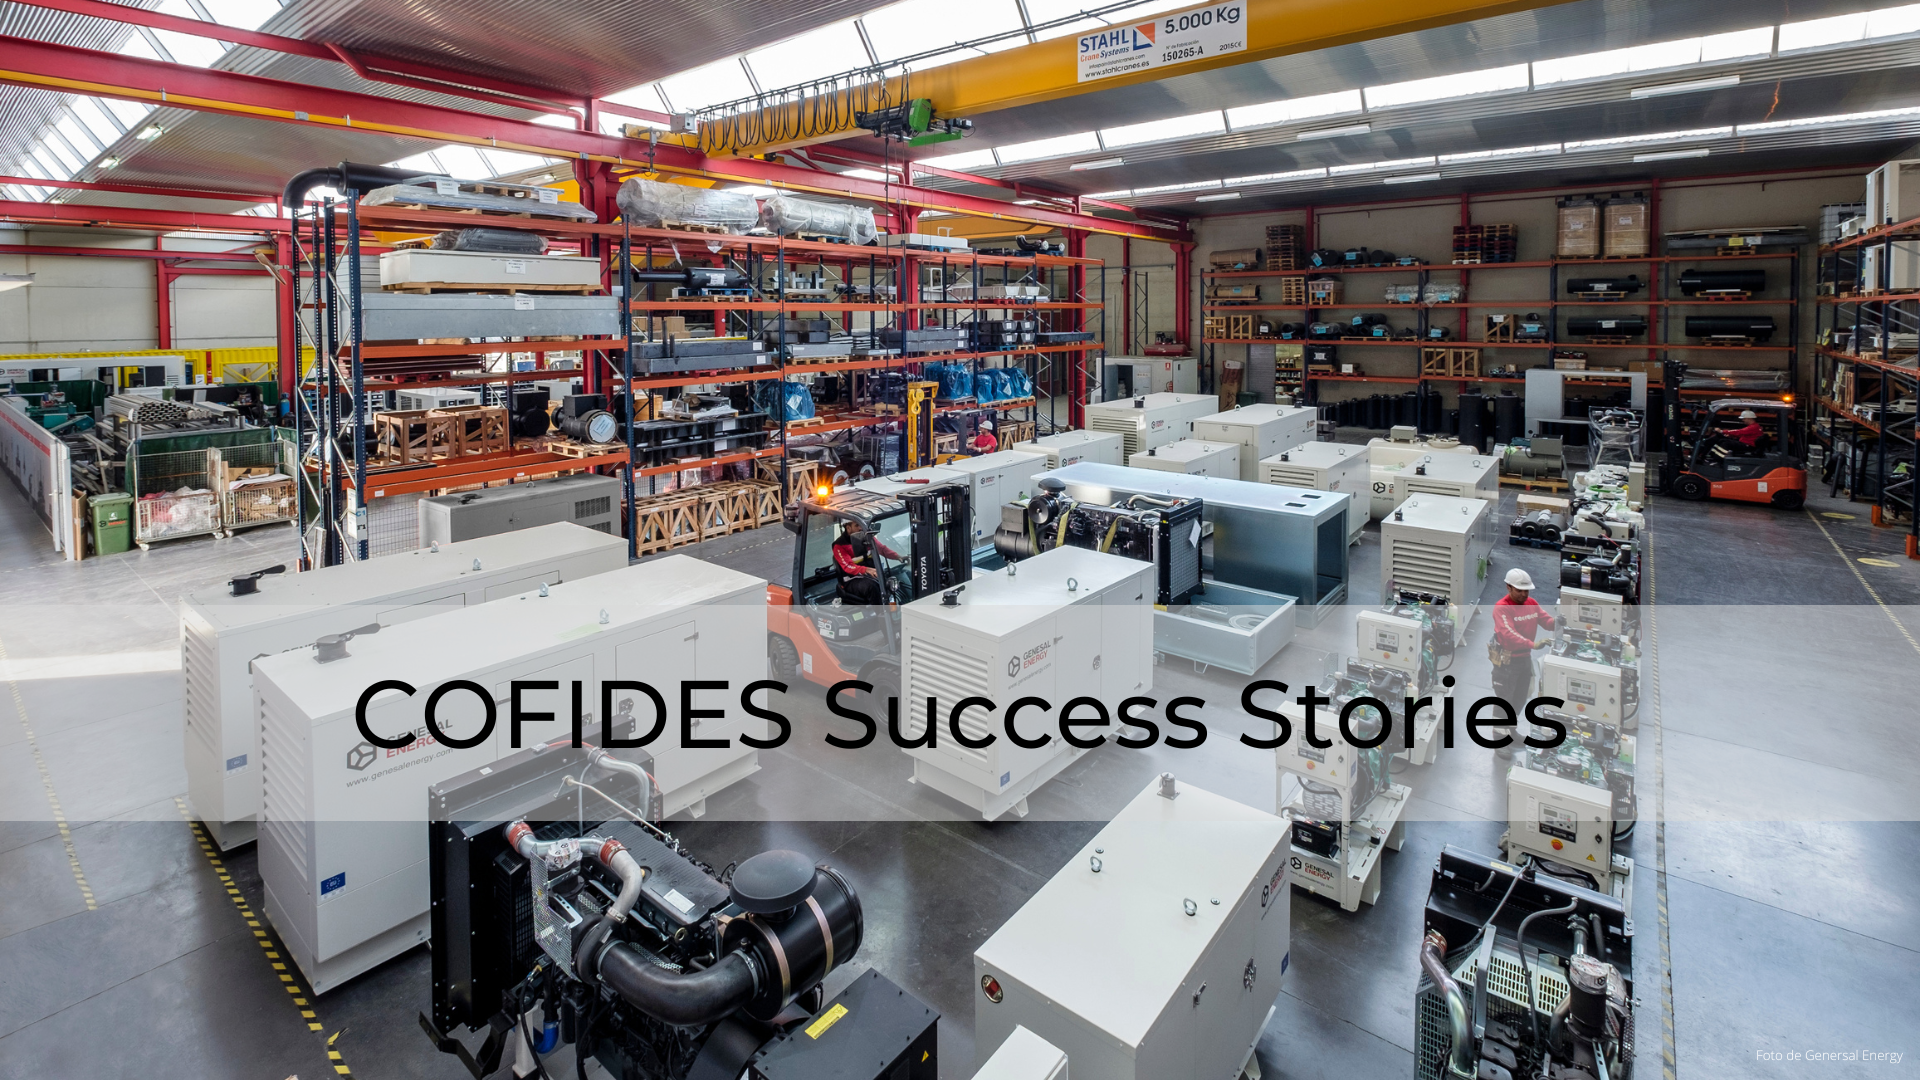 Image of the promotional banner of COFIDES success stories